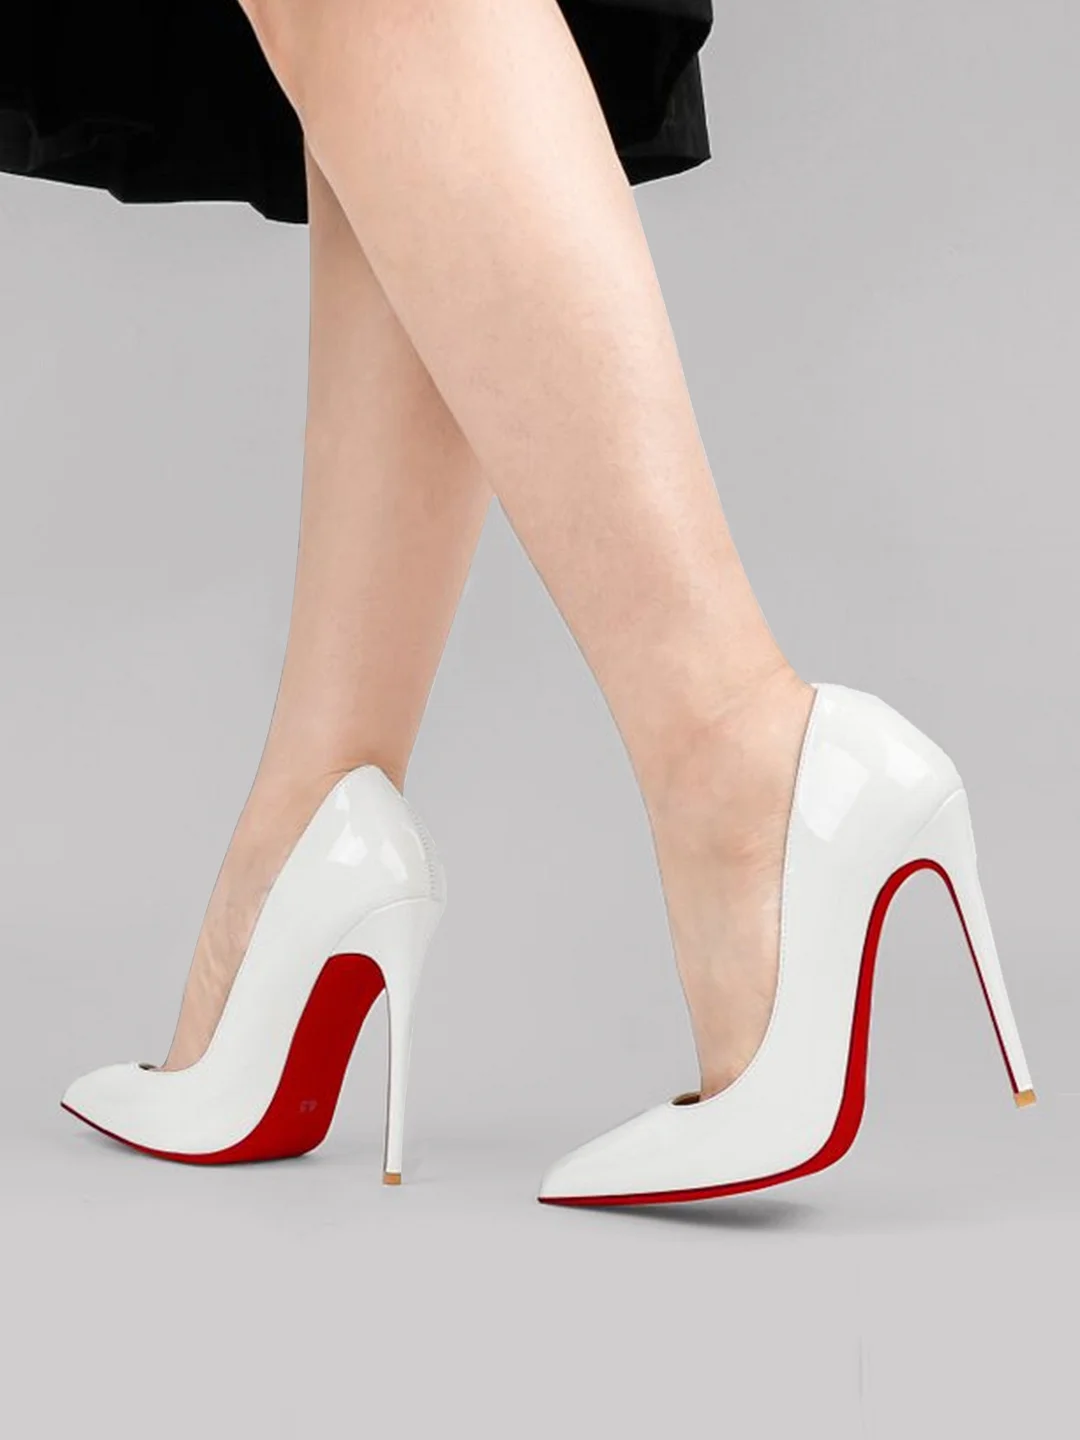 120mm Red Bottom Women's Pointy Toe Party Wedding High Heels